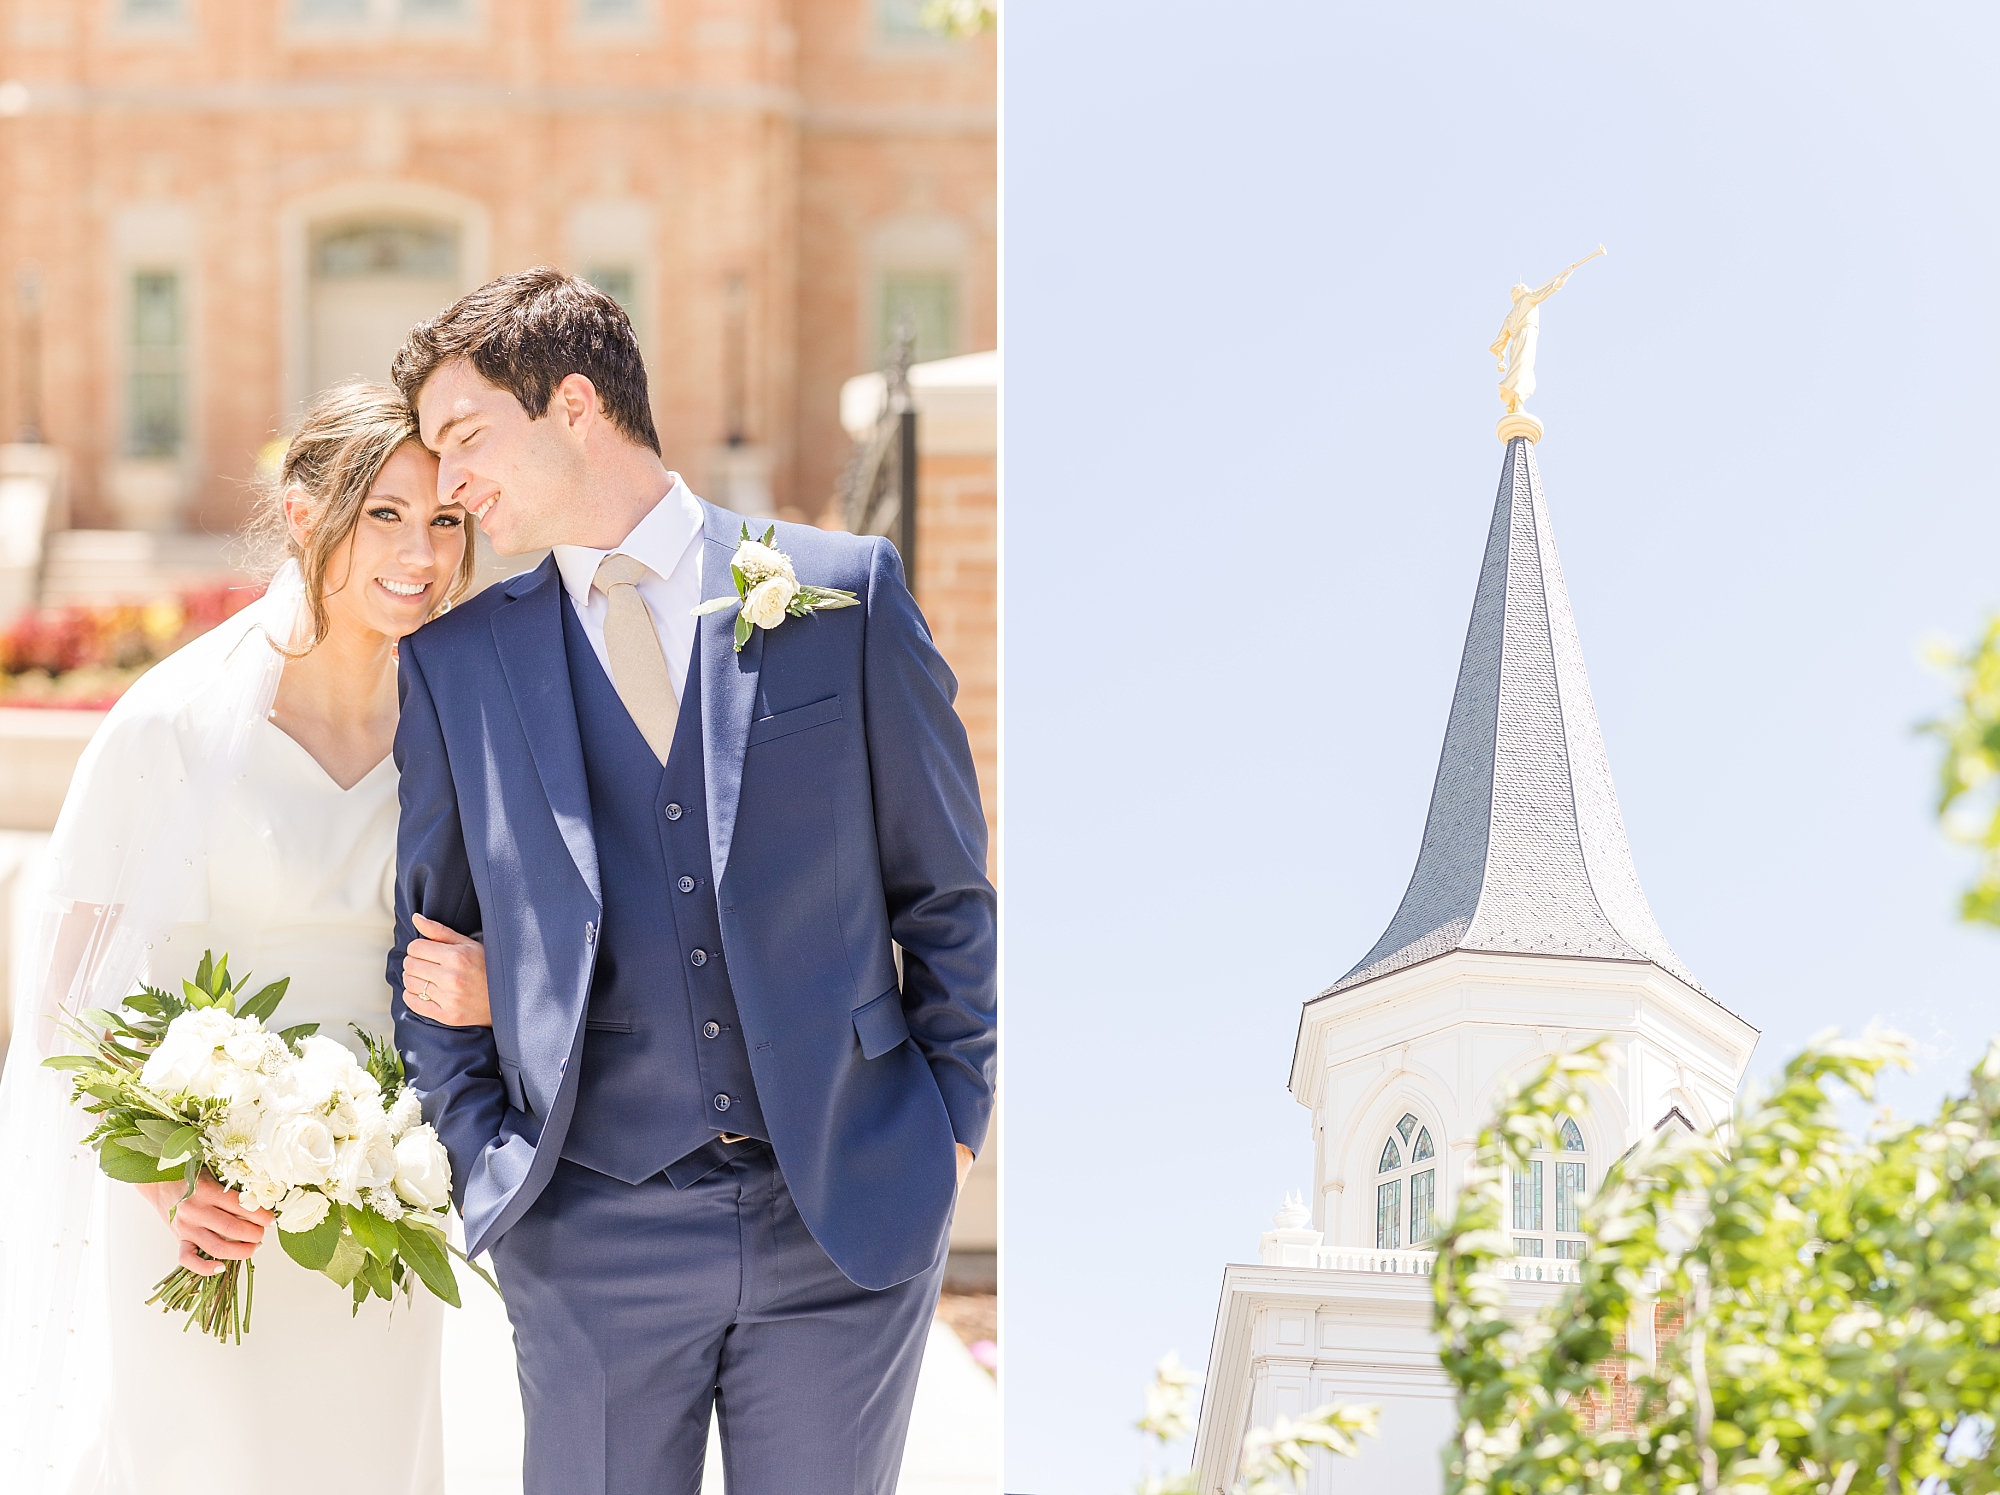 Getting married at the Provo City Center Temple